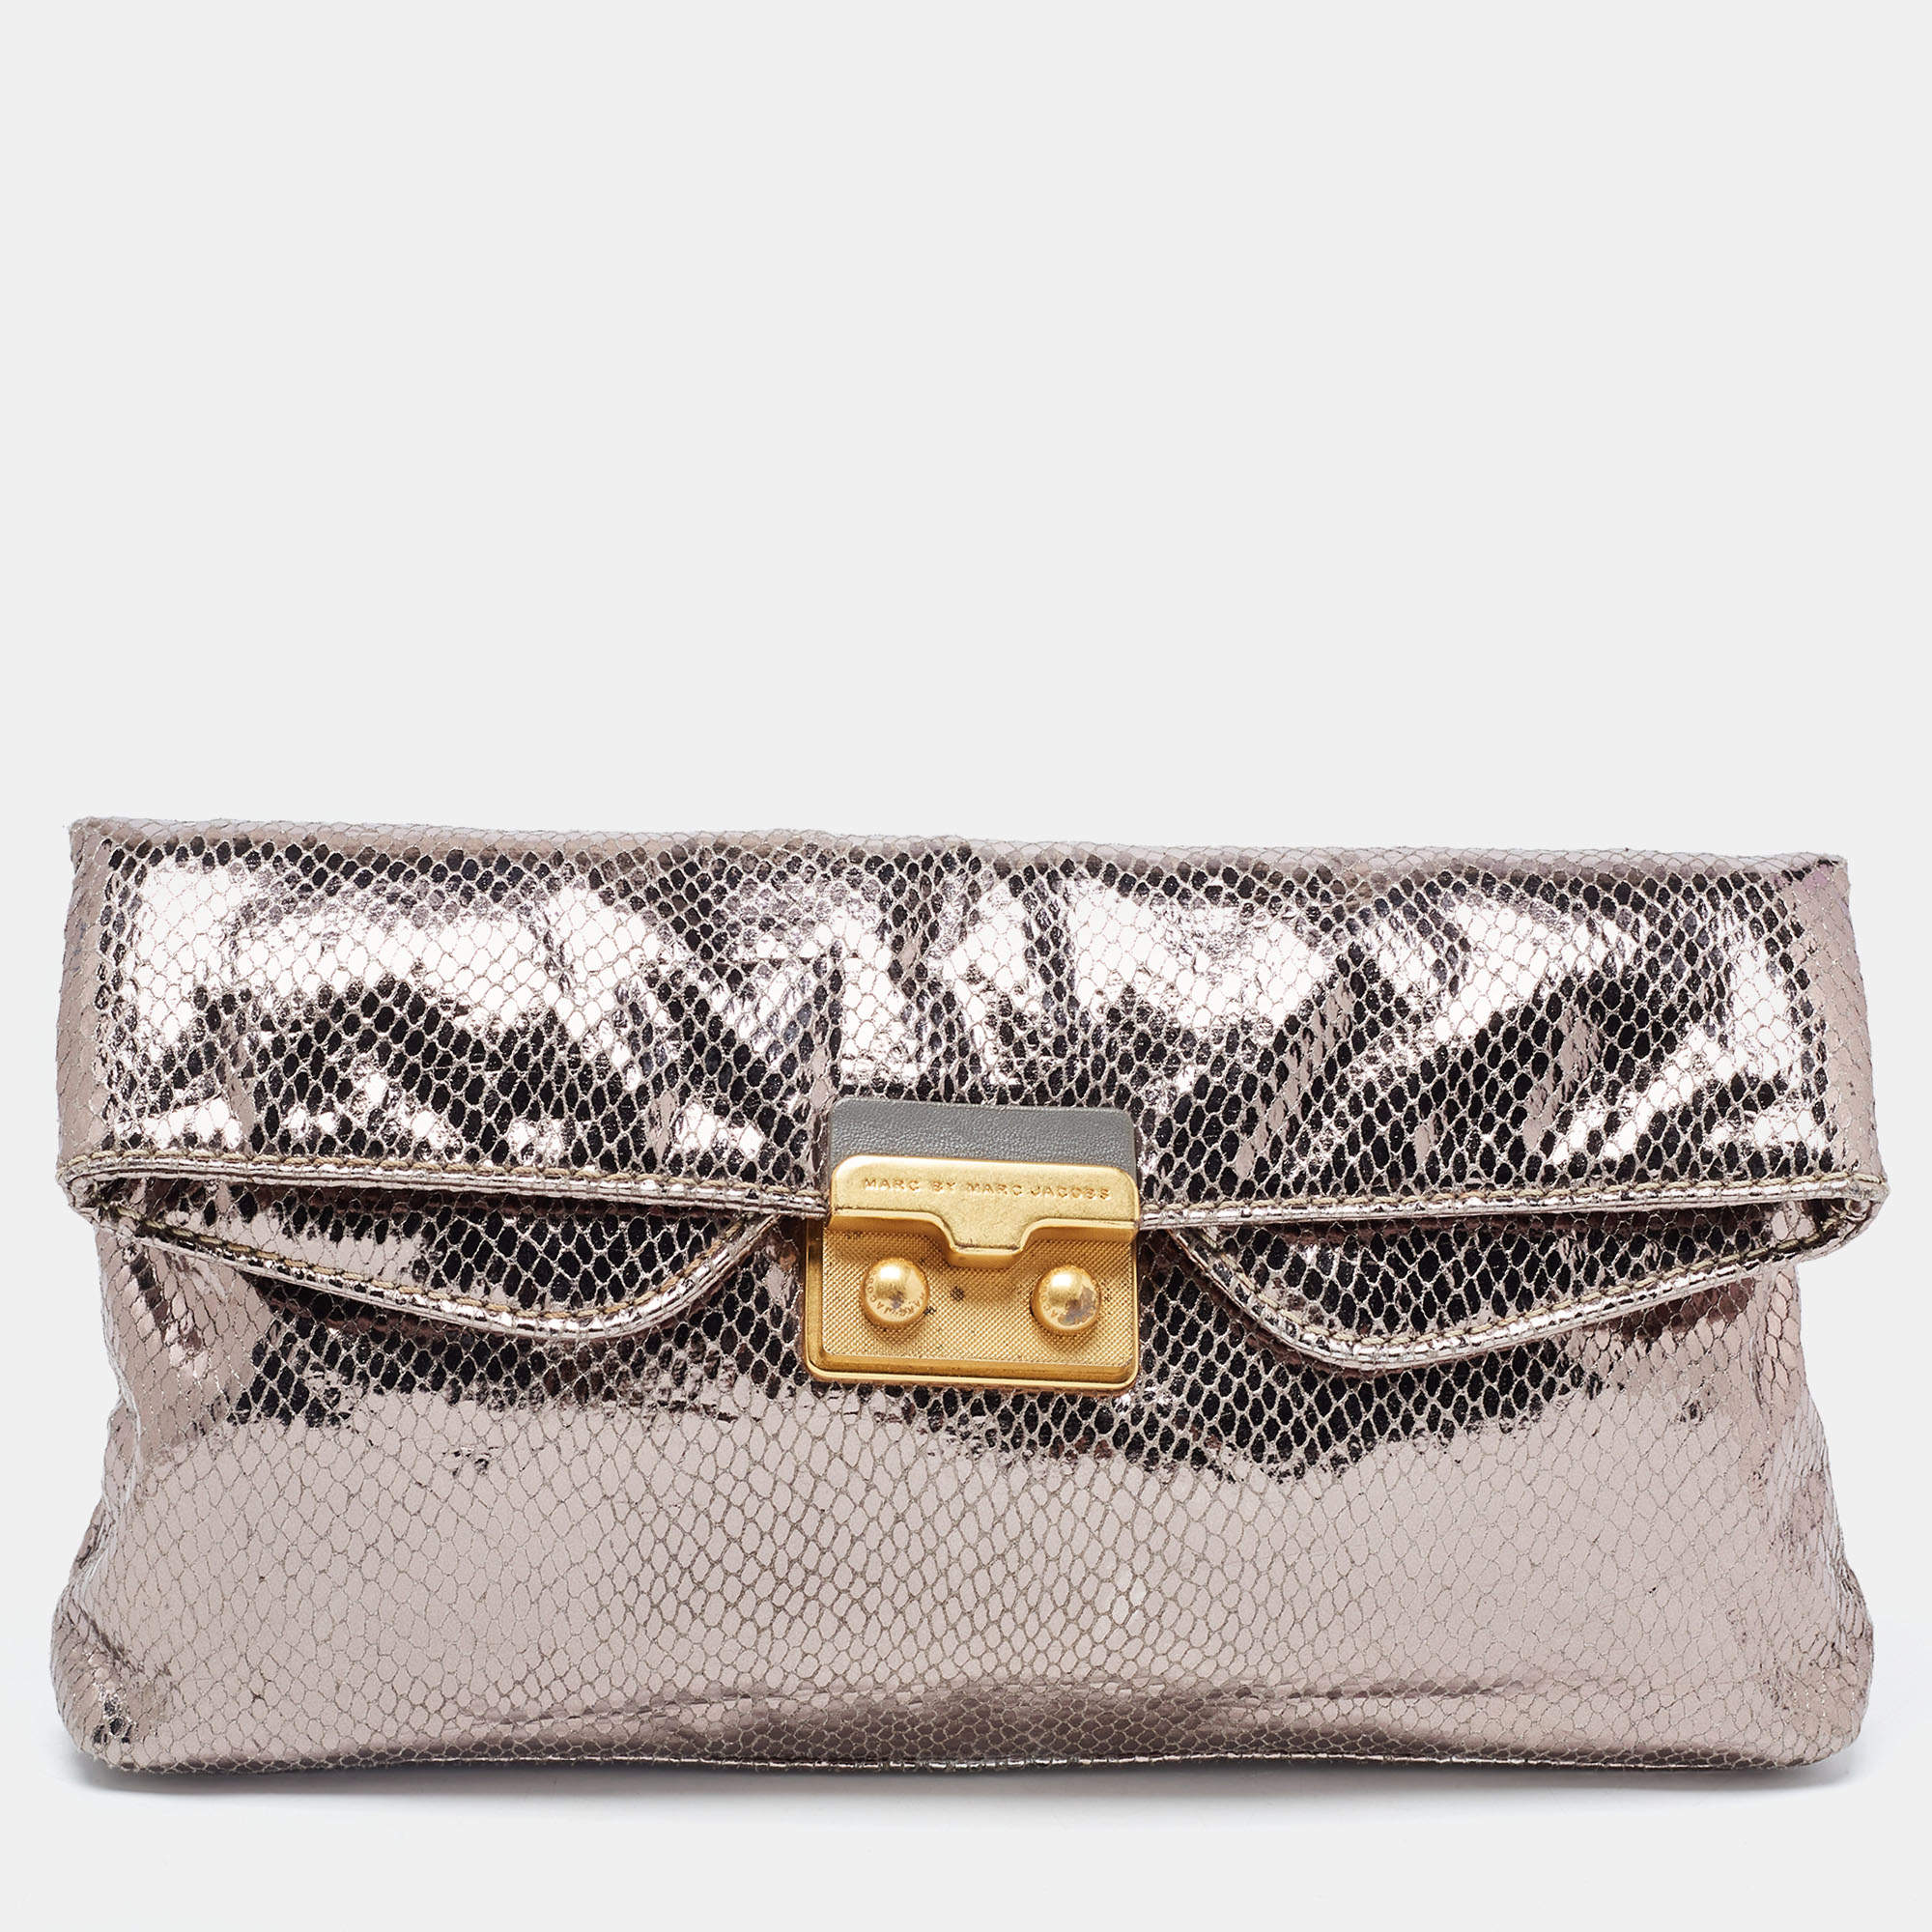 Marc by Marc Jacobs Metallic Silver Snakeskin Embossed Leather Foldover Clutch